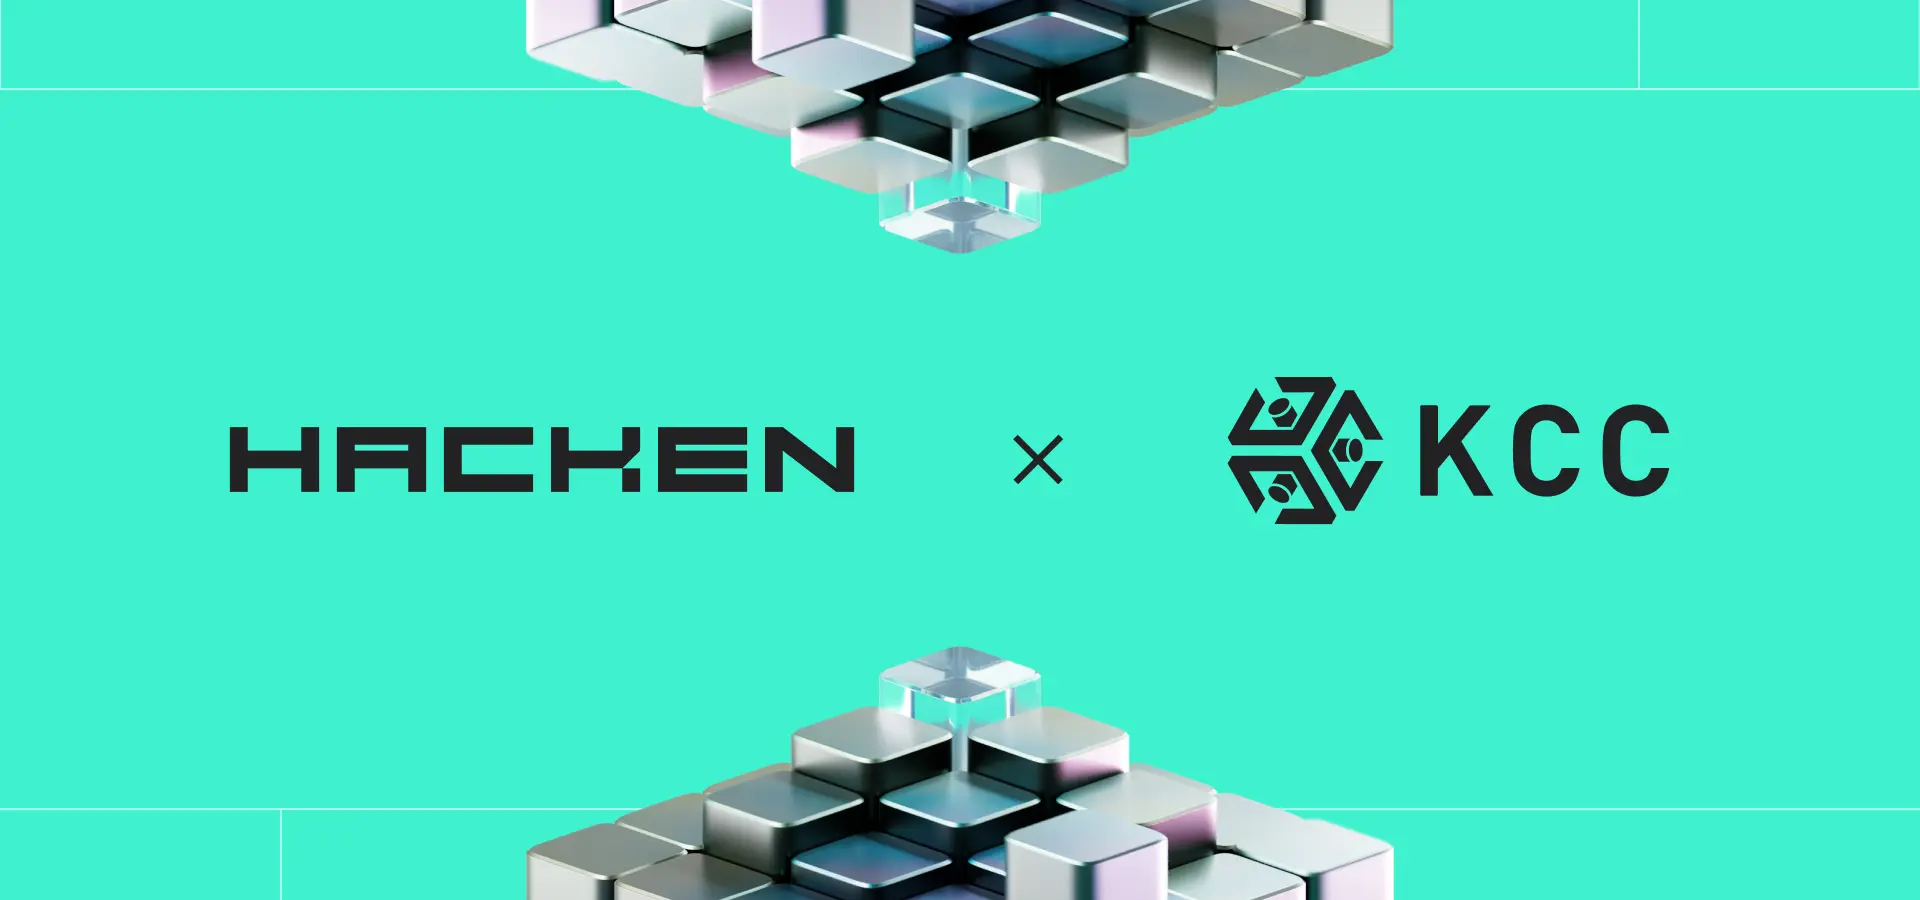 Announcing New Partnership: Hacken & KCC Join Forces